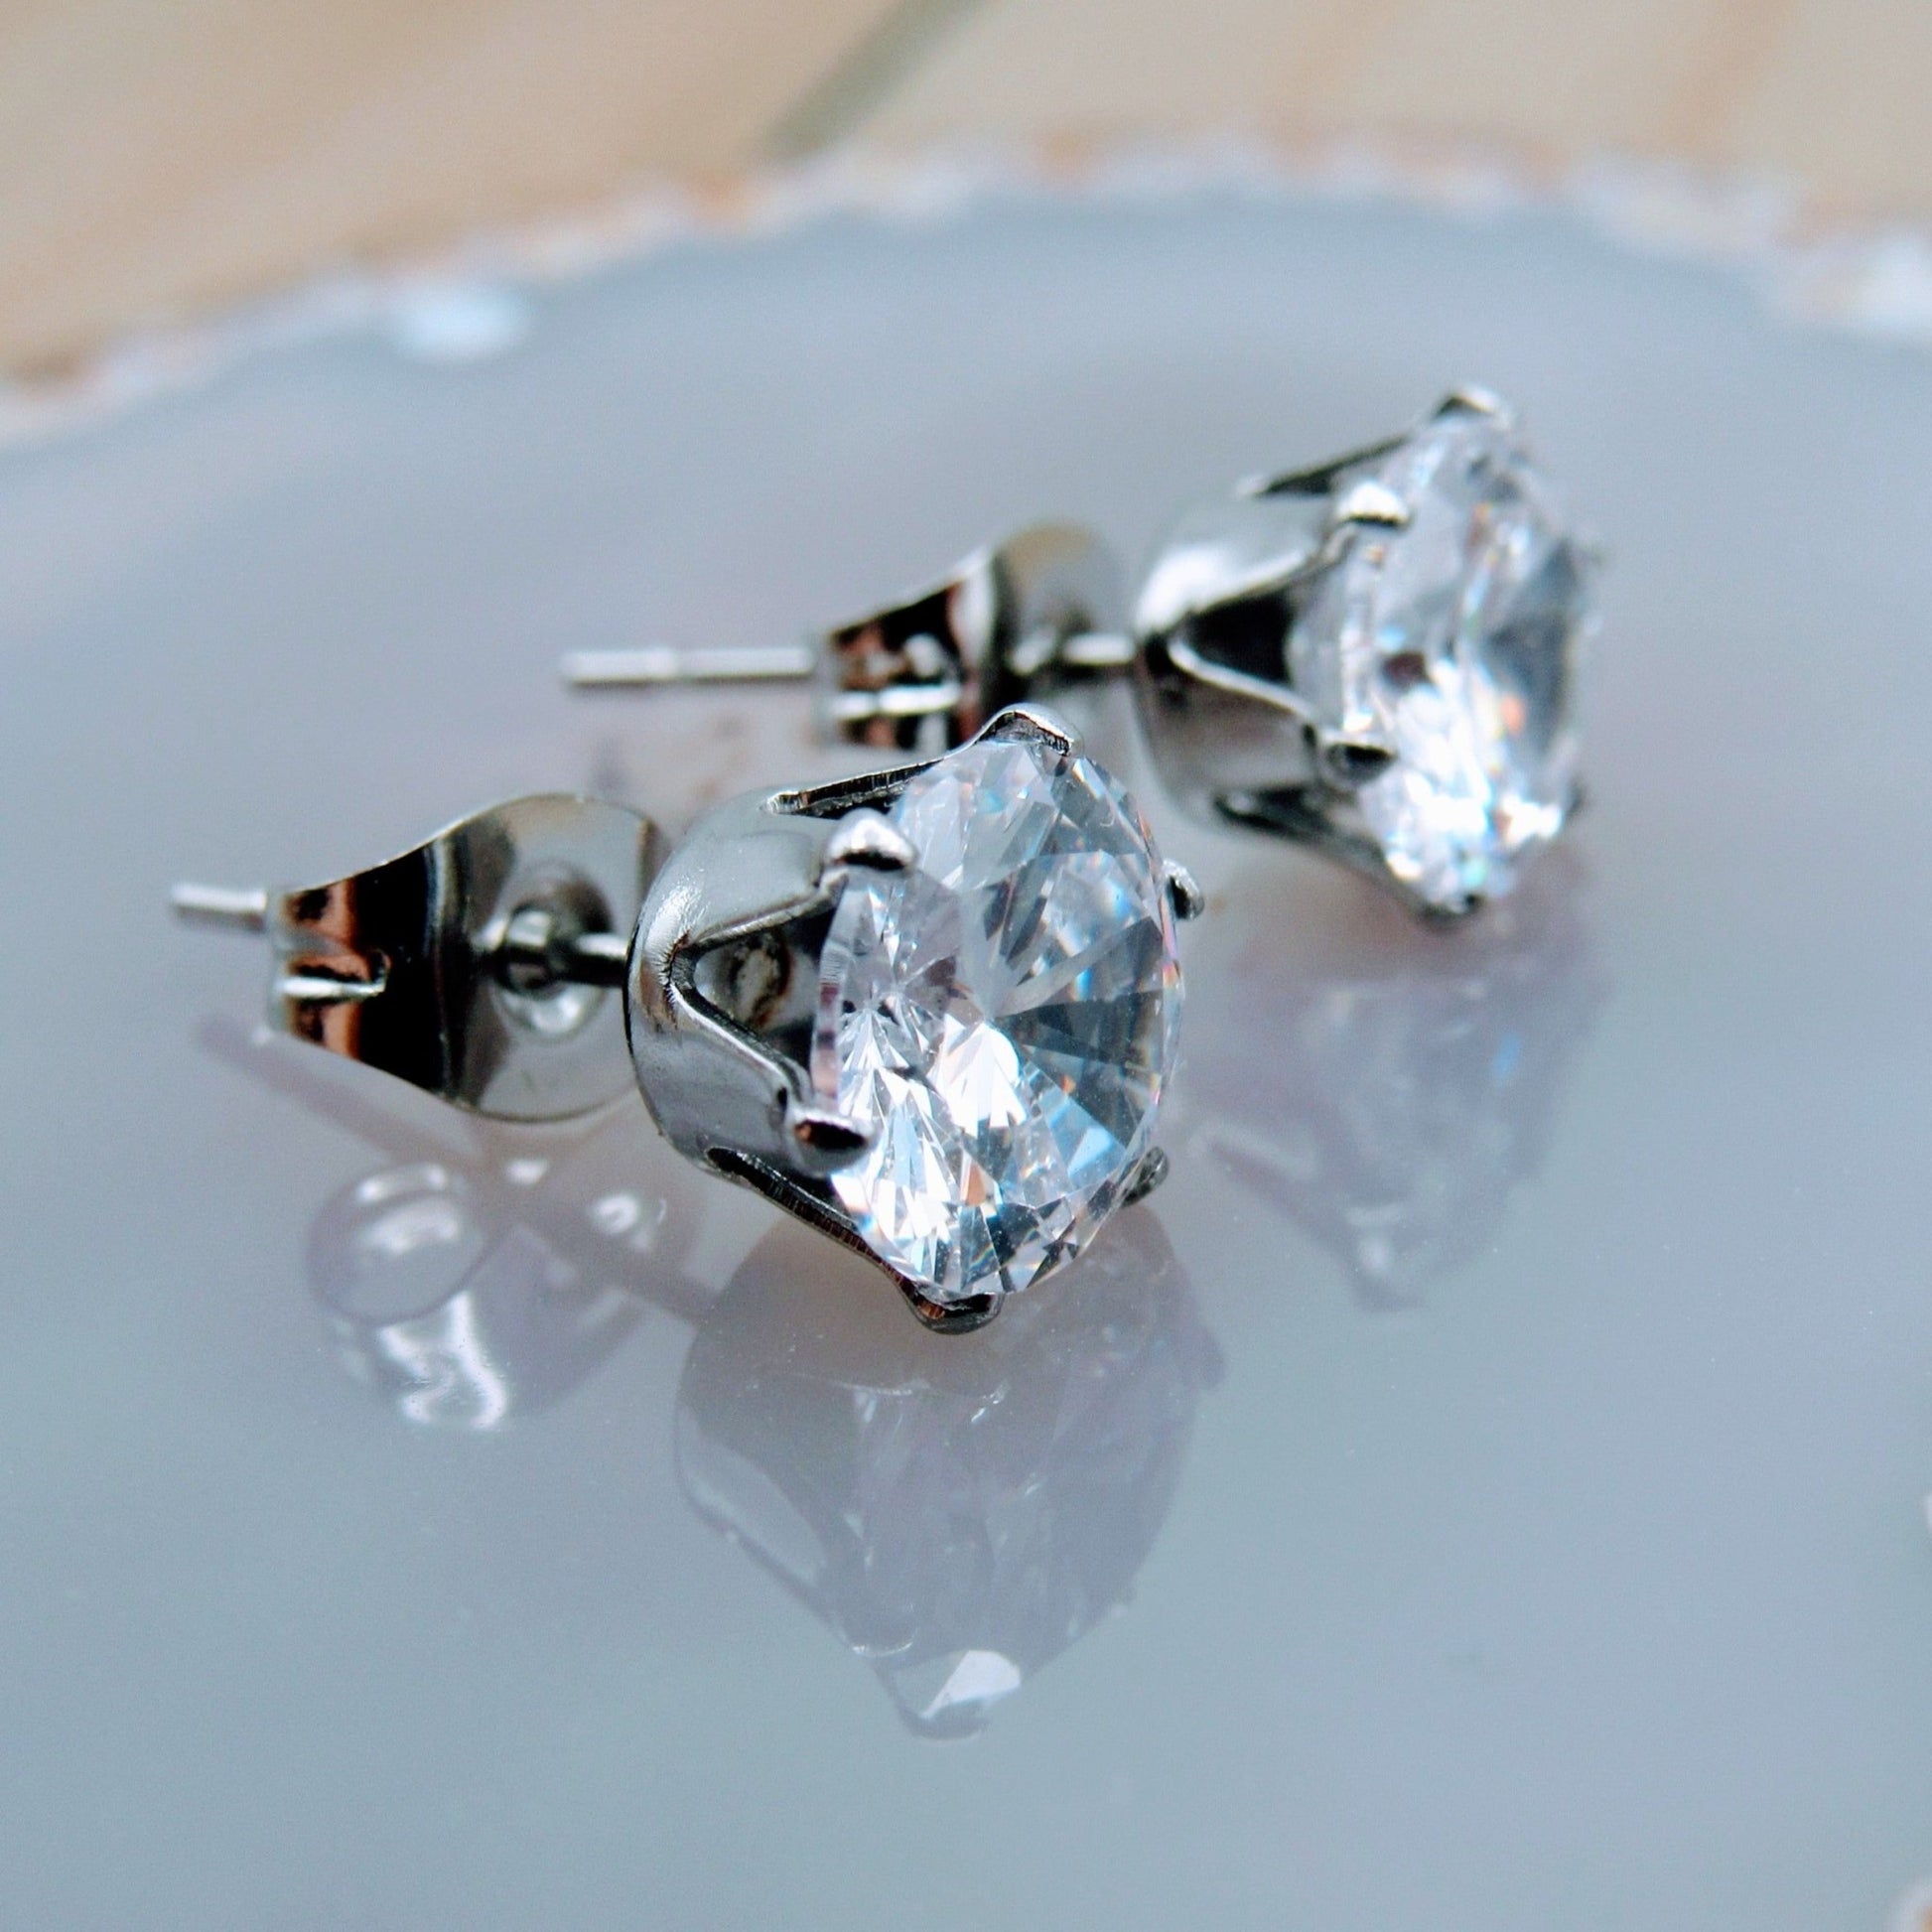 20g Titanium Post & Butterfly Back with Prong Set CZ Stud Earrings